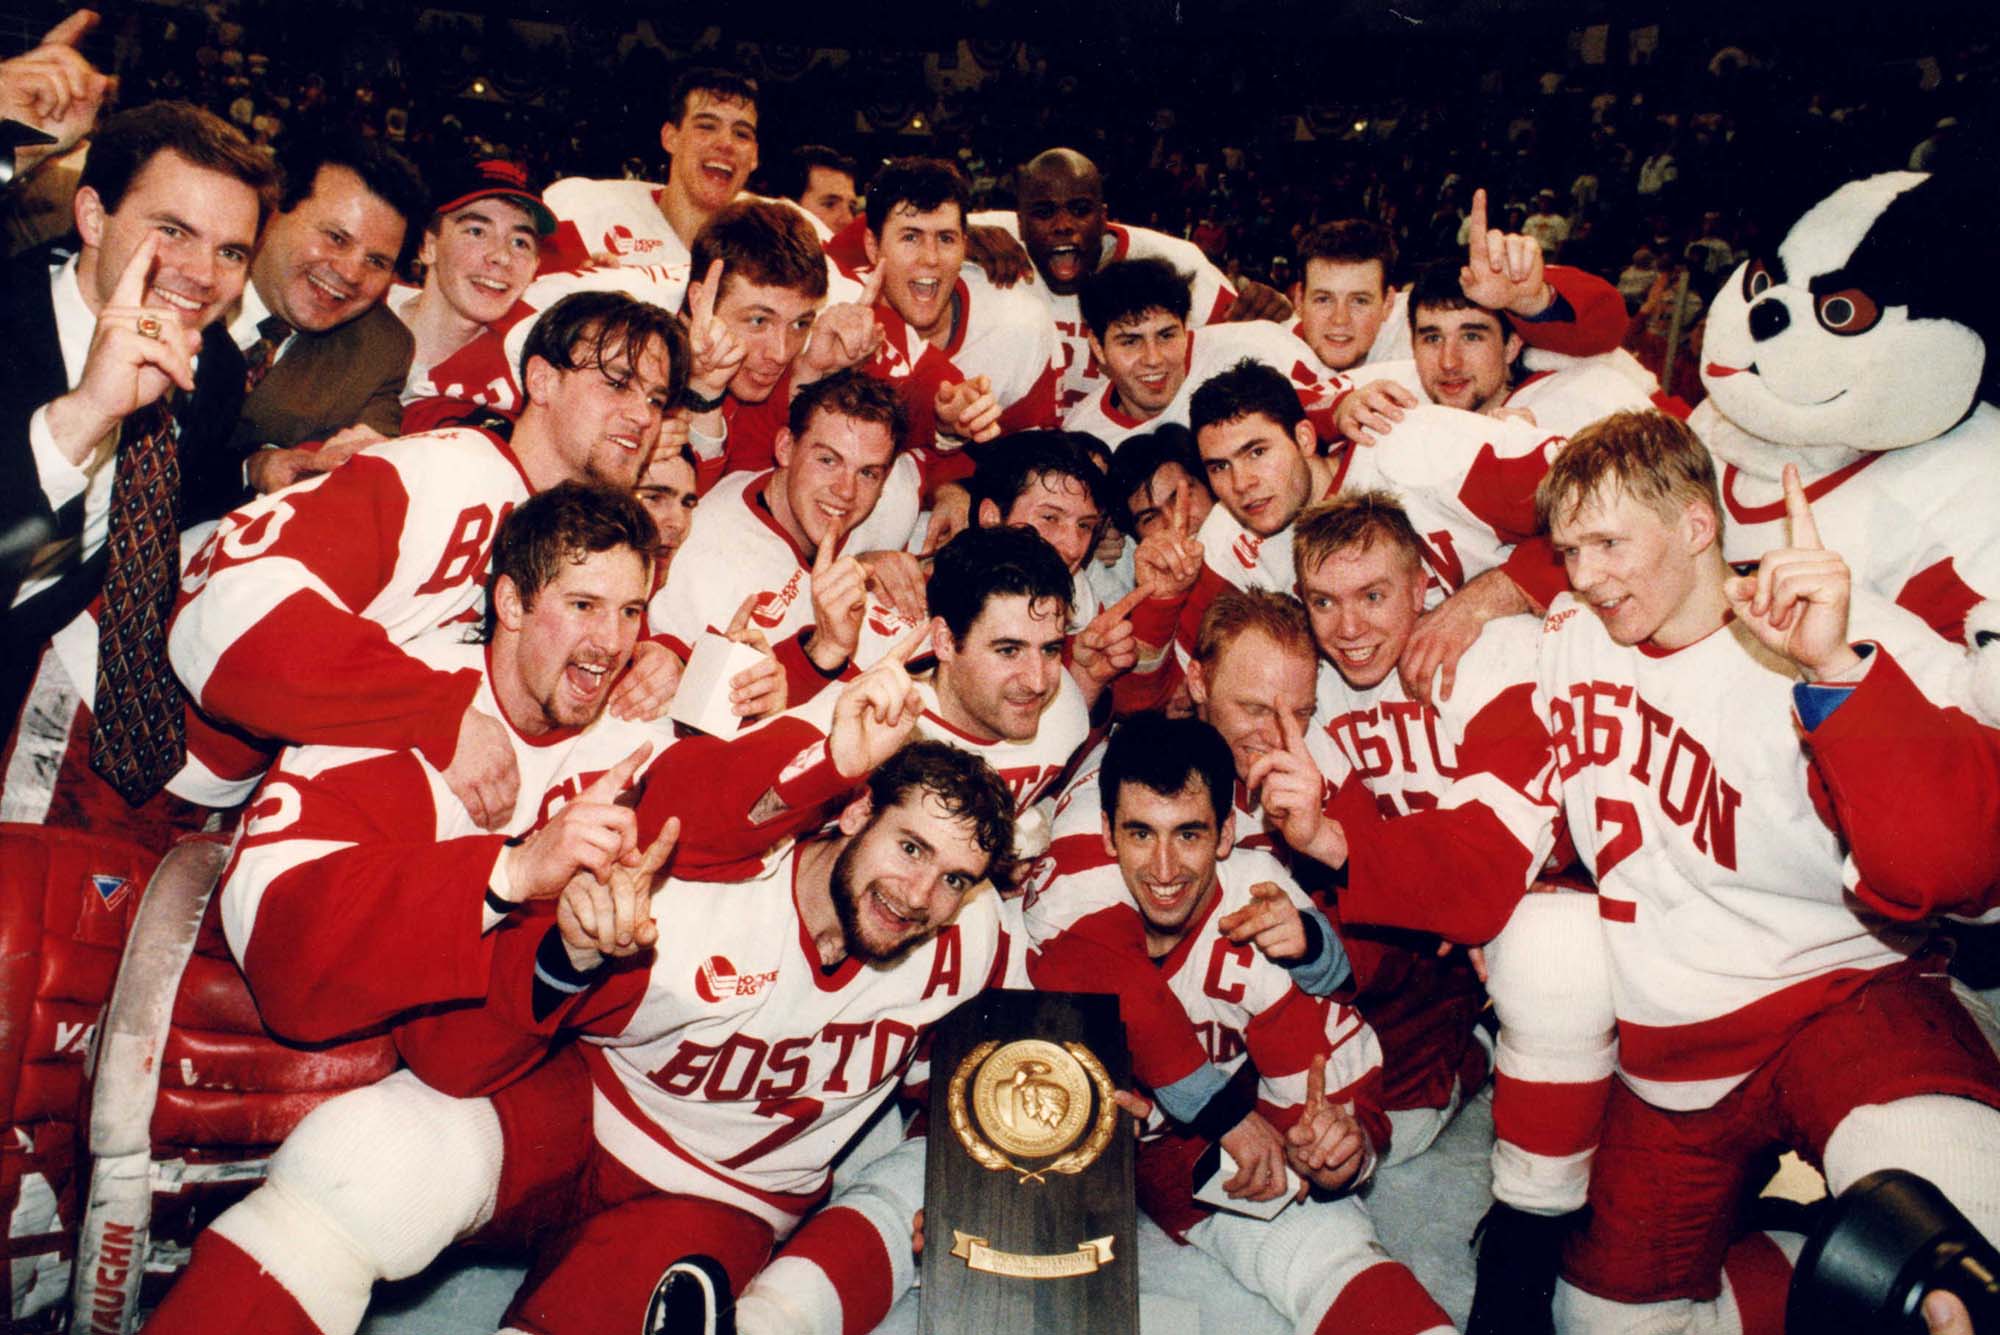 Photo: Group photo of the BU men's ice hockey team with the NCAA trophy. They all pose in the "Boston" red and white hockey uniforms and hold up a finger each signifying they're number 1.